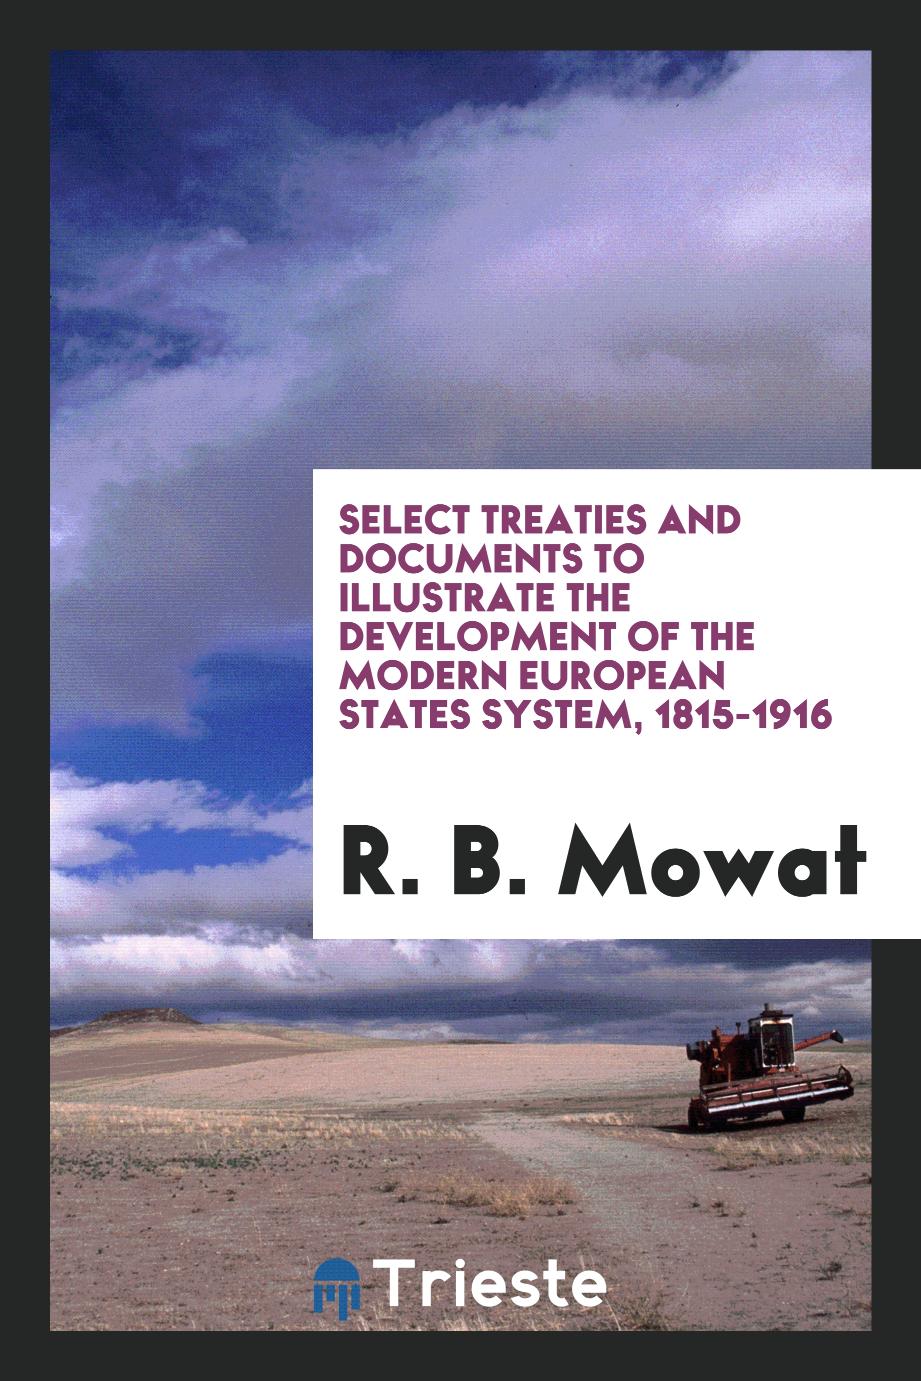 Select treaties and documents to illustrate the development of the modern European states system, 1815-1916